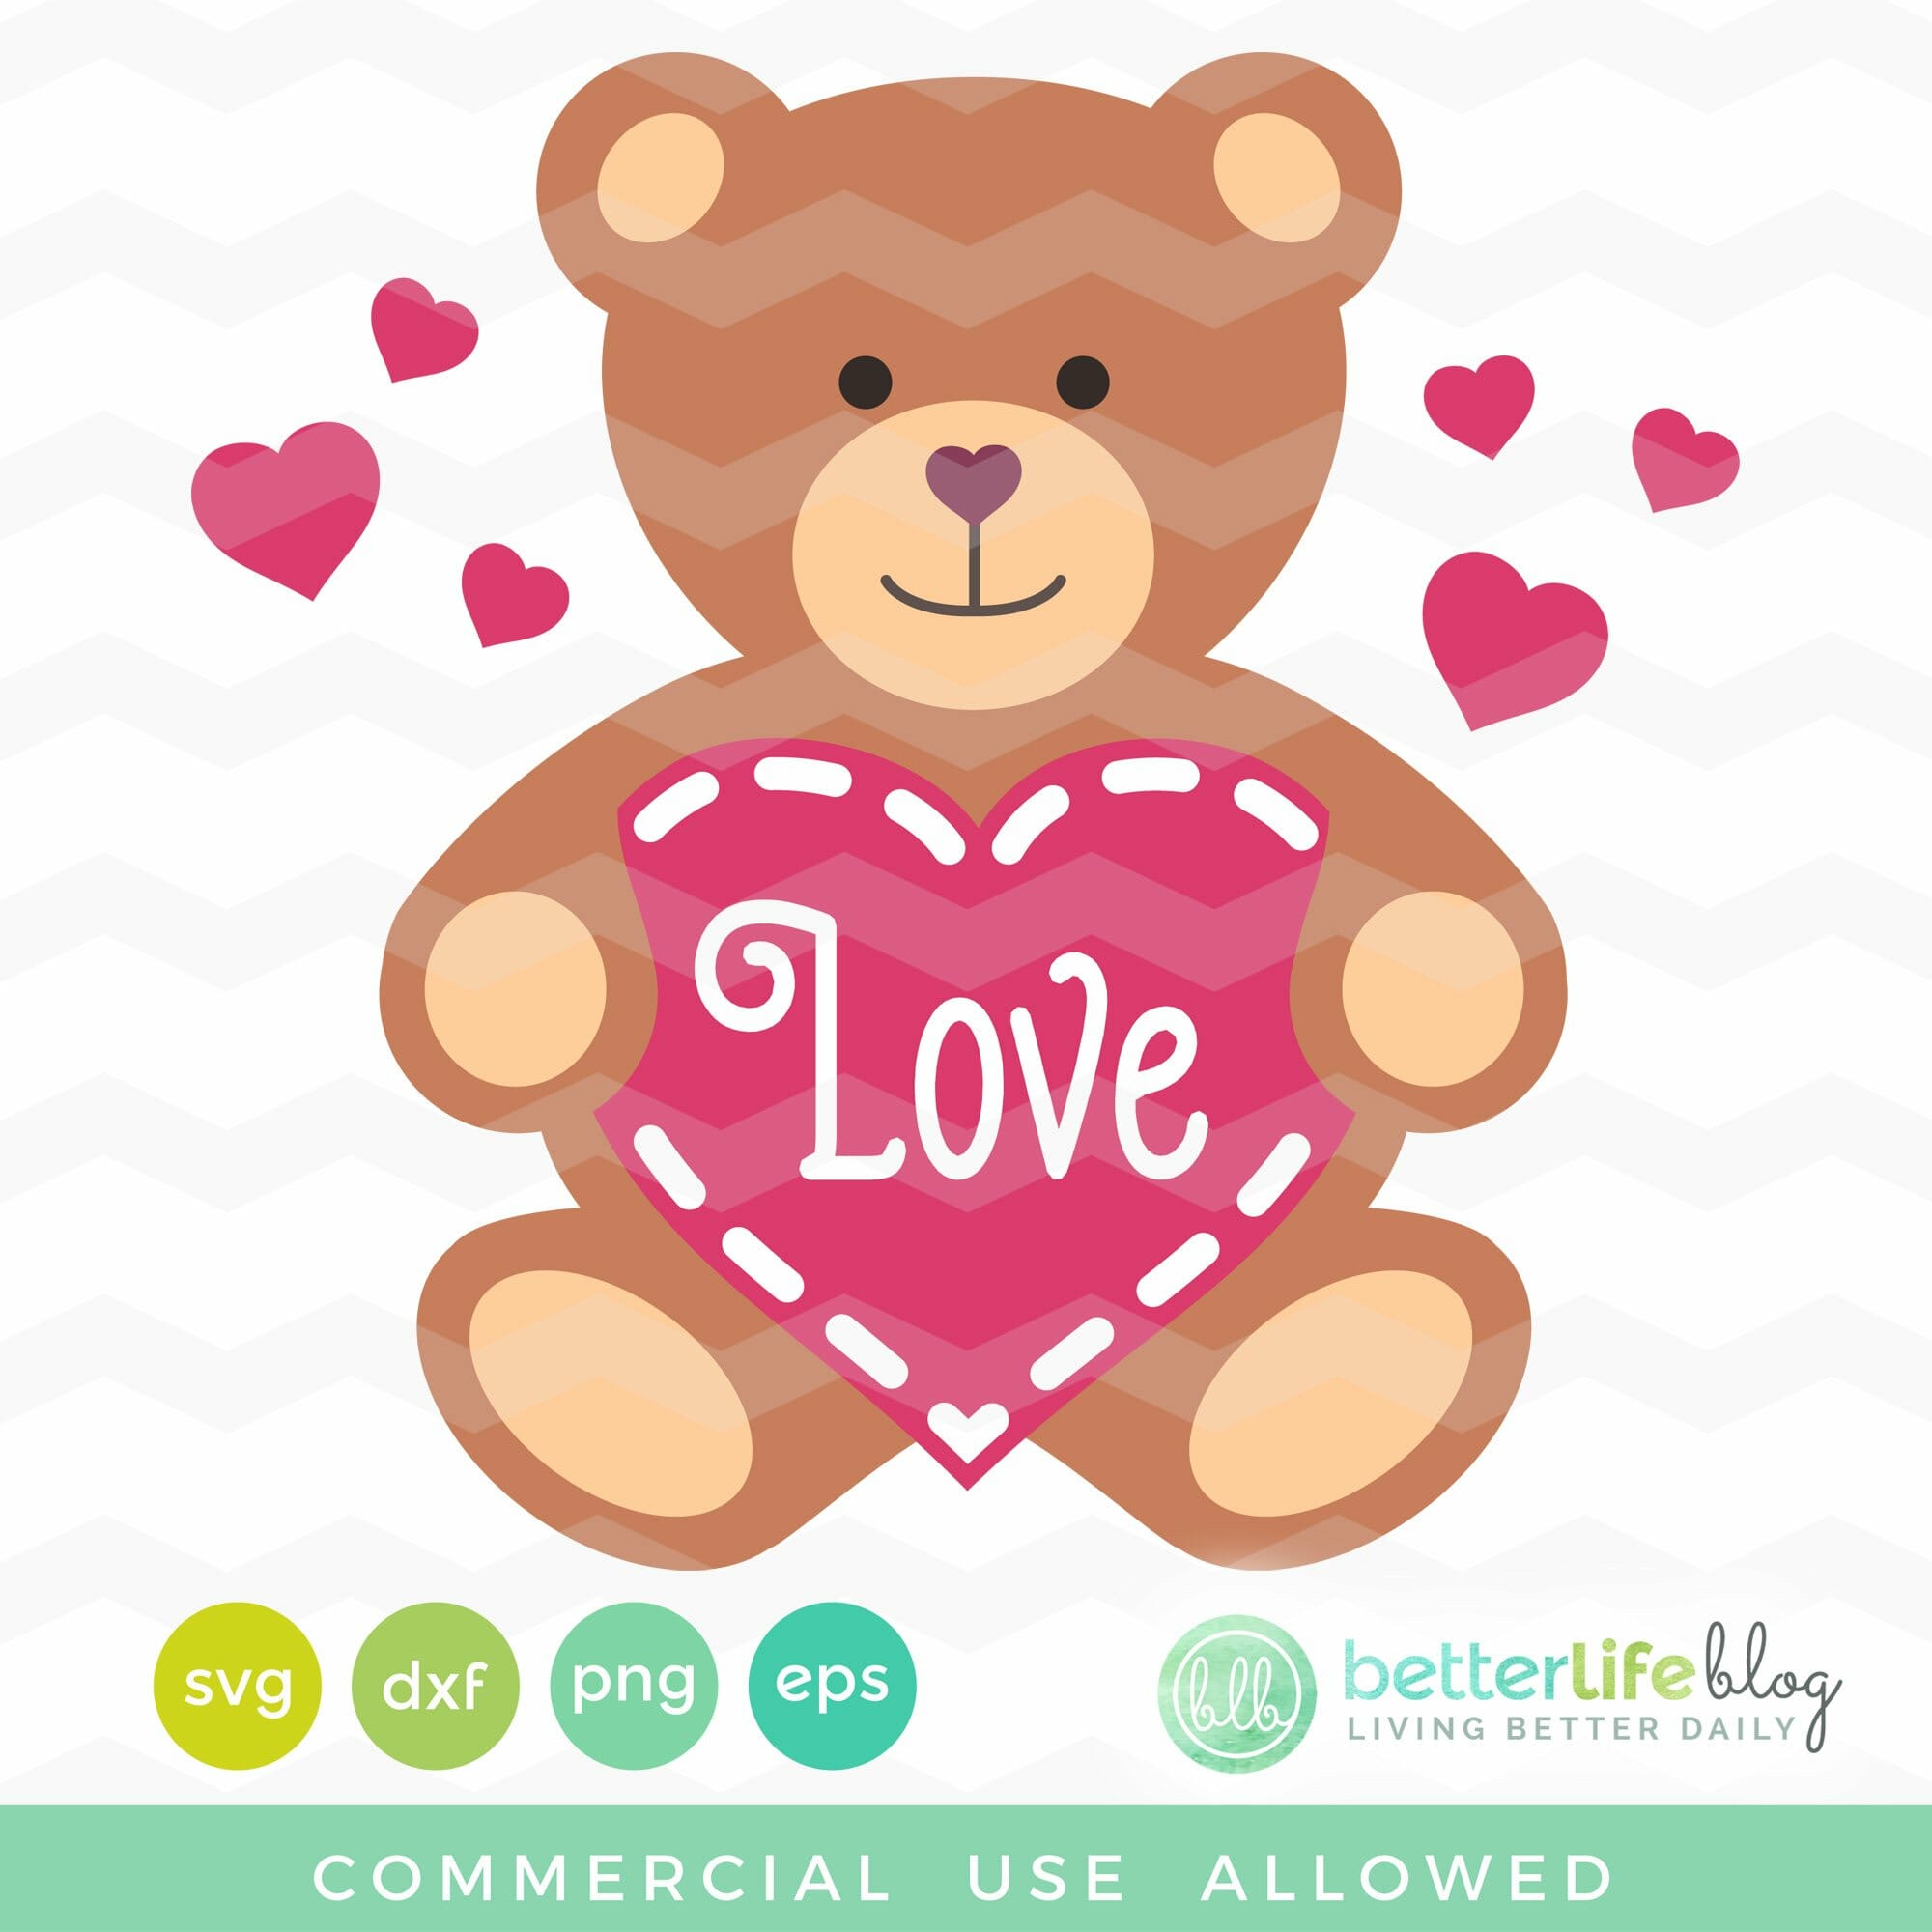 Teddy Bear SVG cut file for Silhouette and Scrapbooking Projects